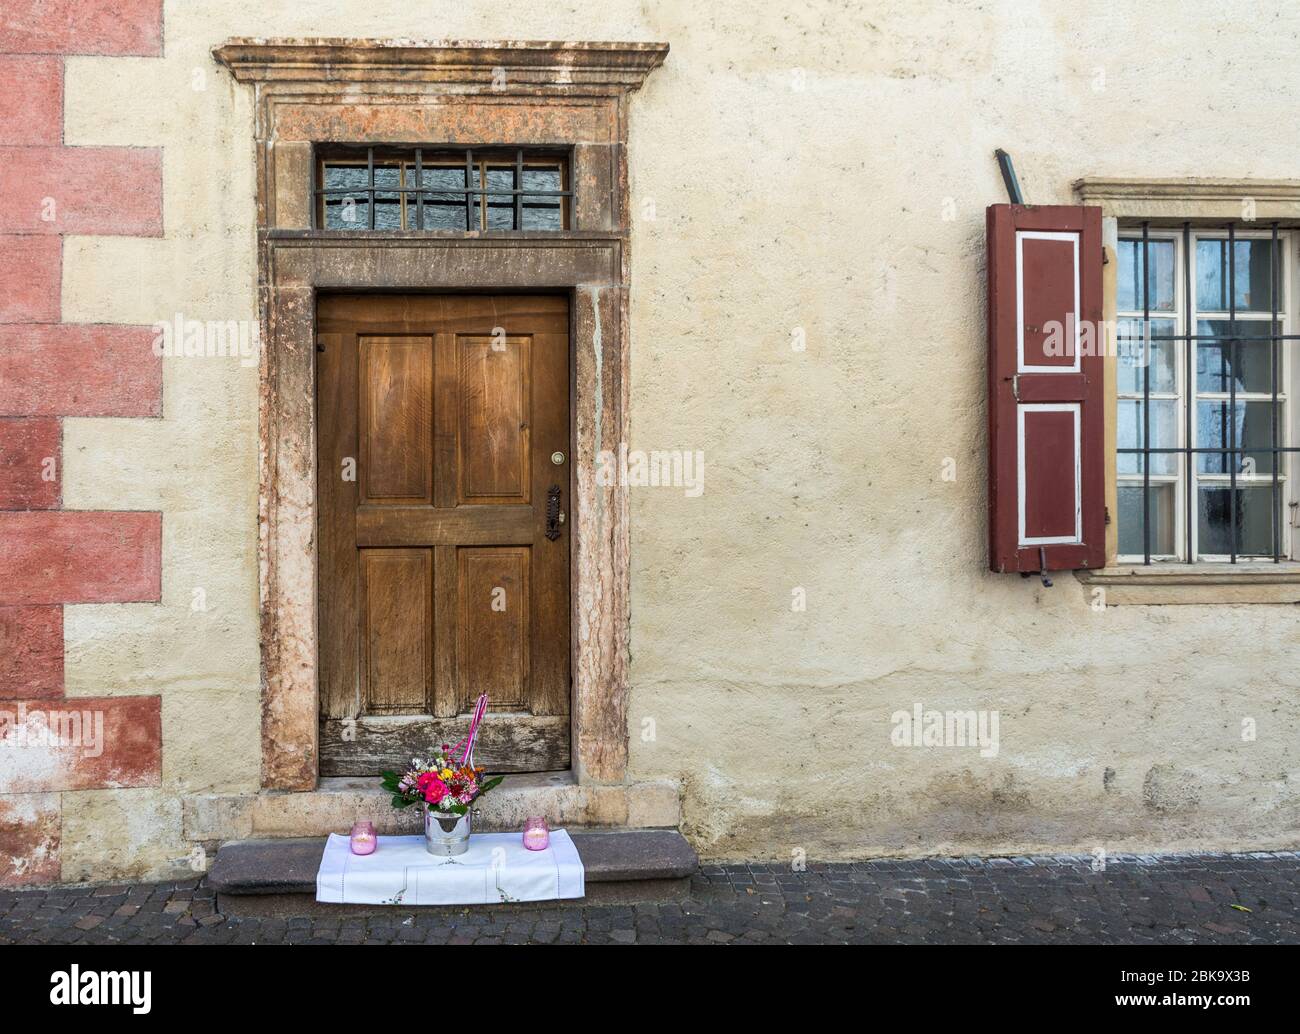 door decorated with flower vase for the festivities of Corpus Christi in South Tyrol, Trentino Alto Adige, Italy Stock Photo